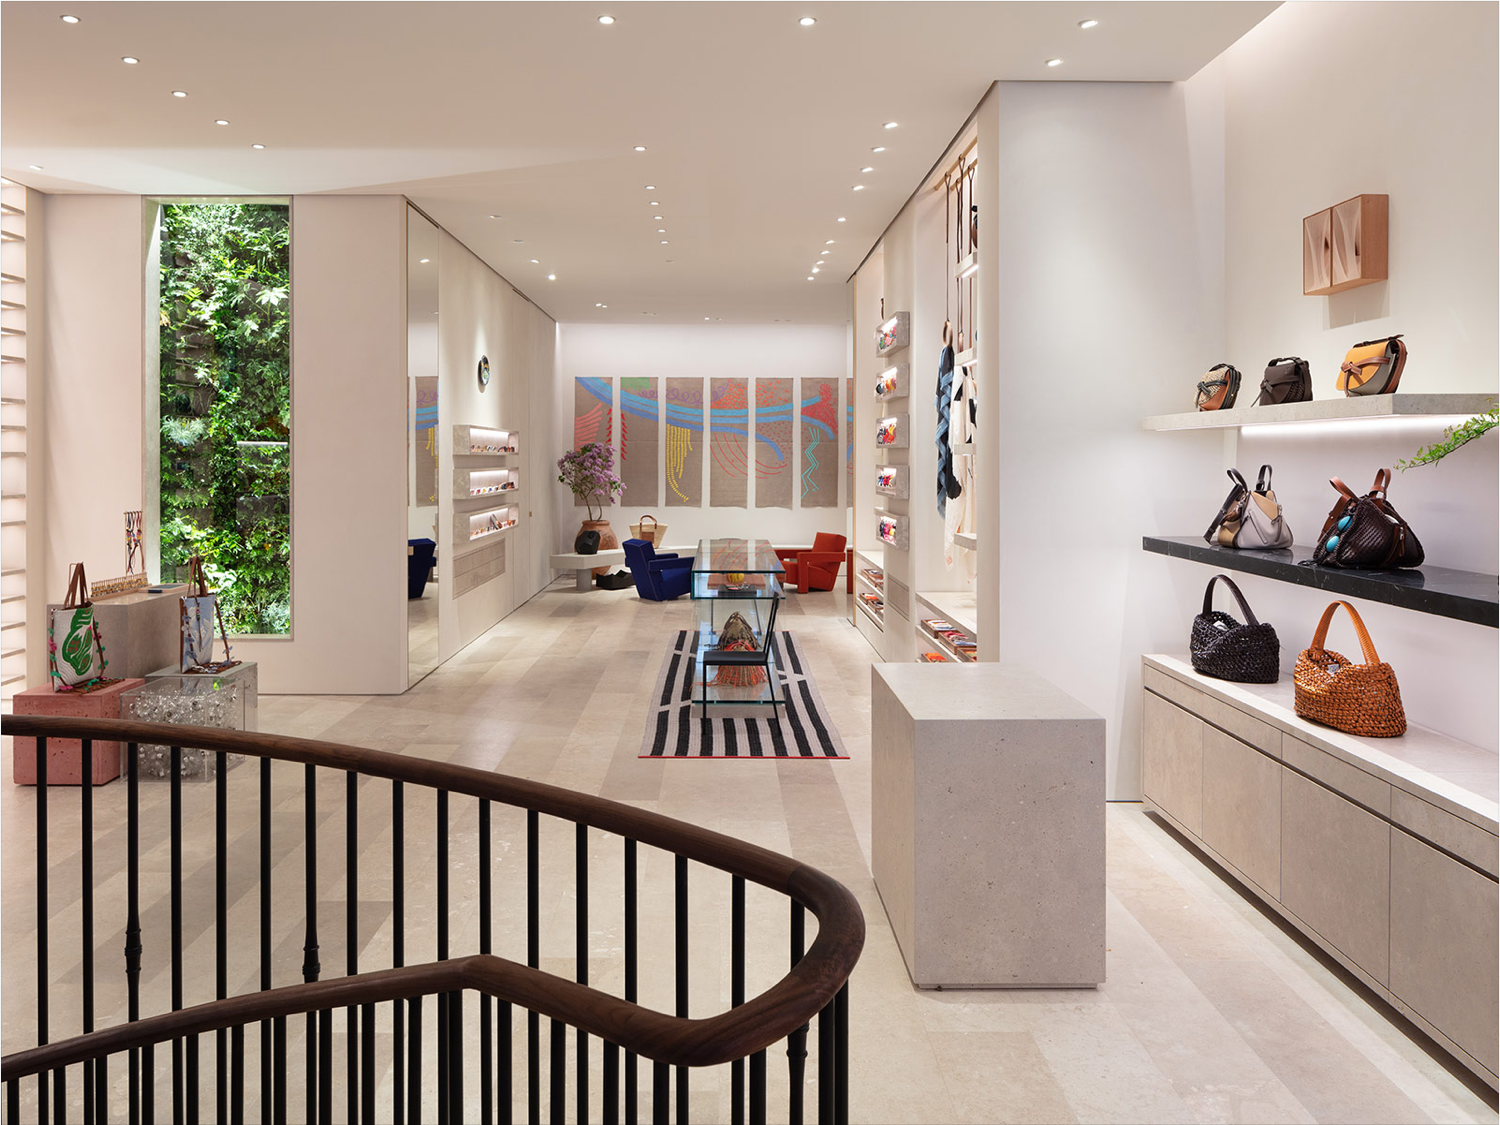 LVMH to open Casa Loewe concept in London in March 2019